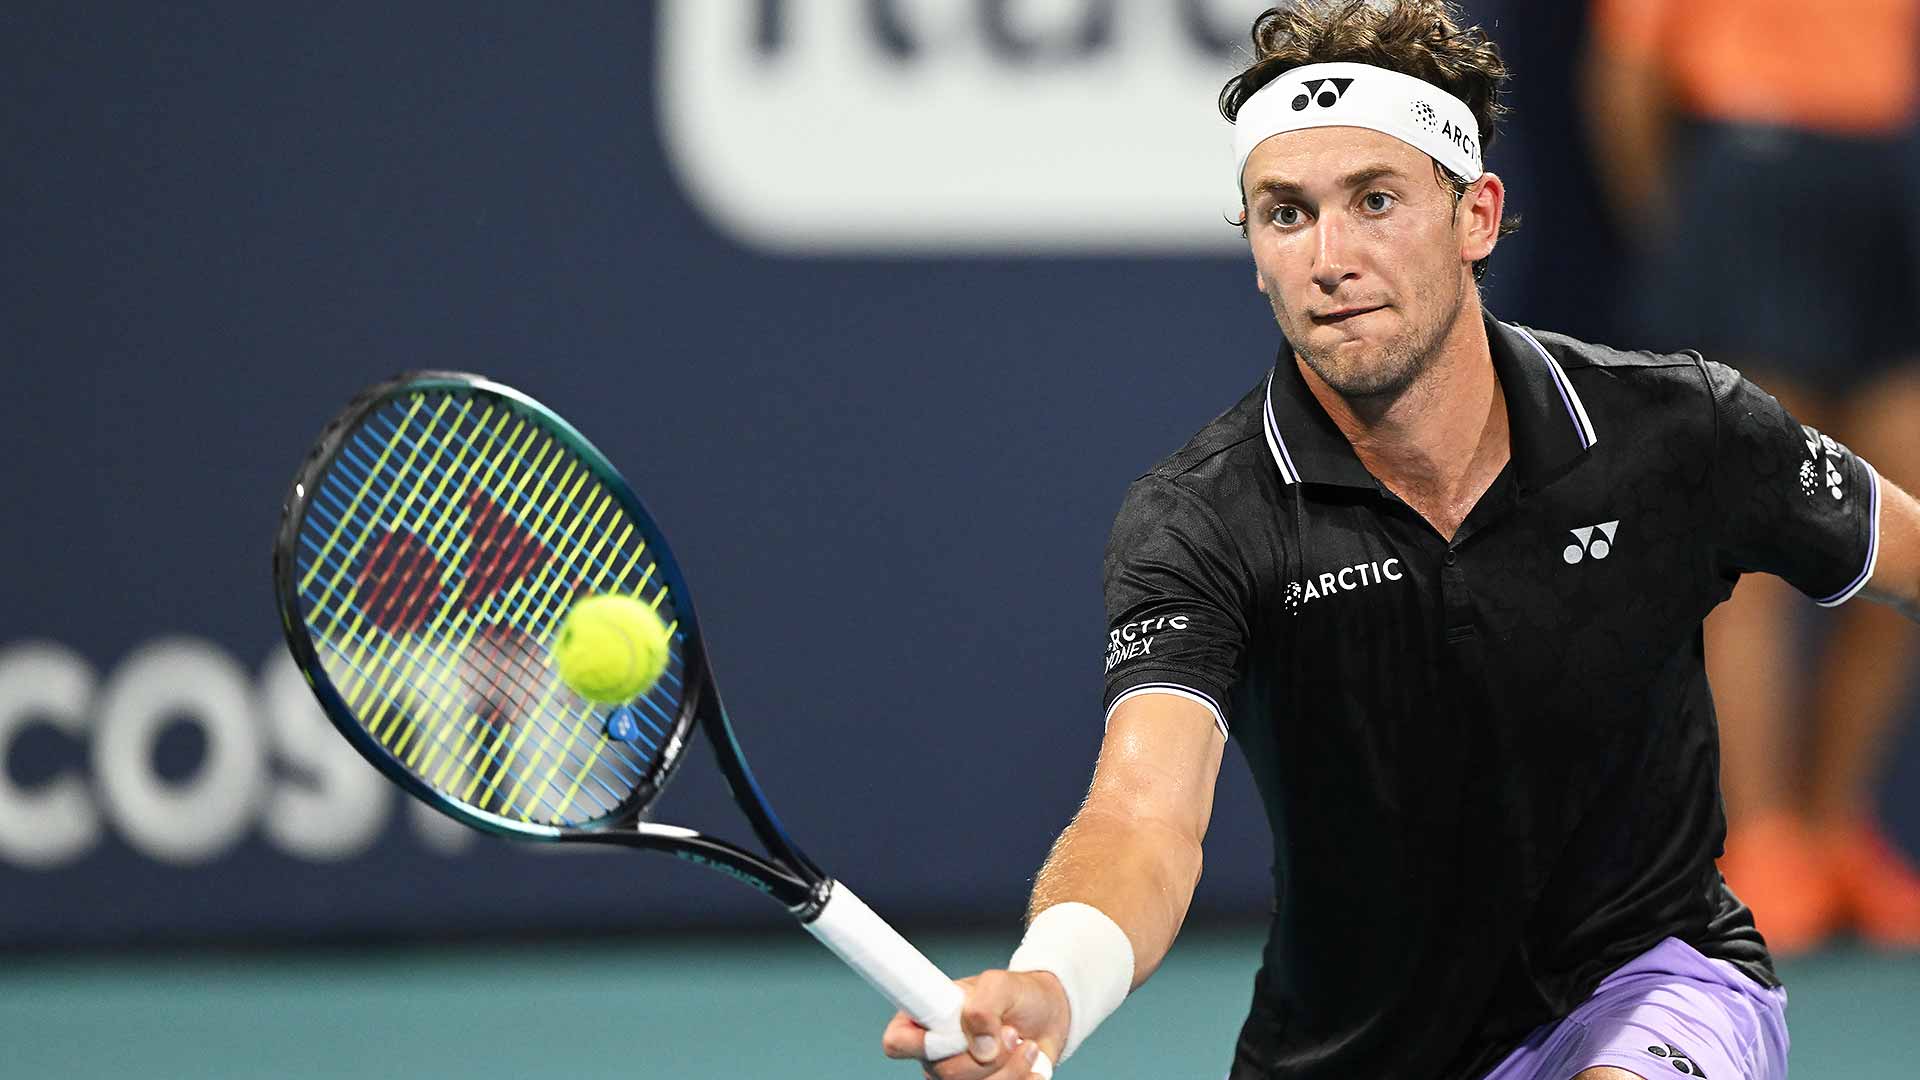 Casper Ruud reached his first ATP Masters 1000 final in Miami last year.